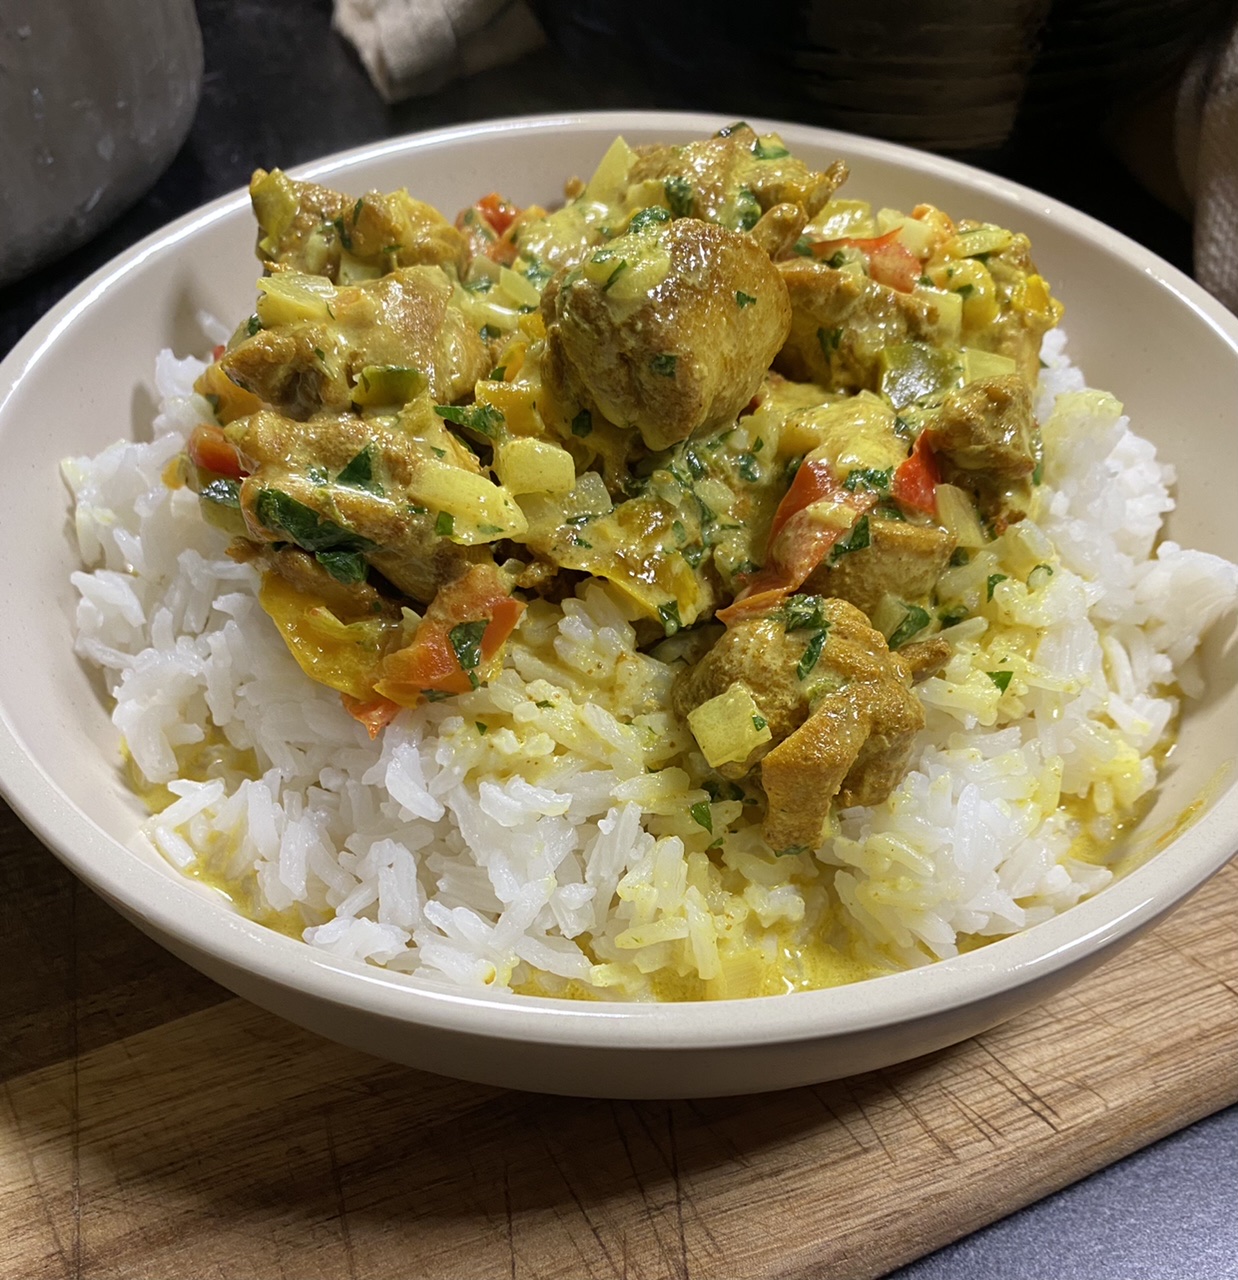 Indian Coconut Curry Chicken in 30 minutes - the Old Woman and the Sea